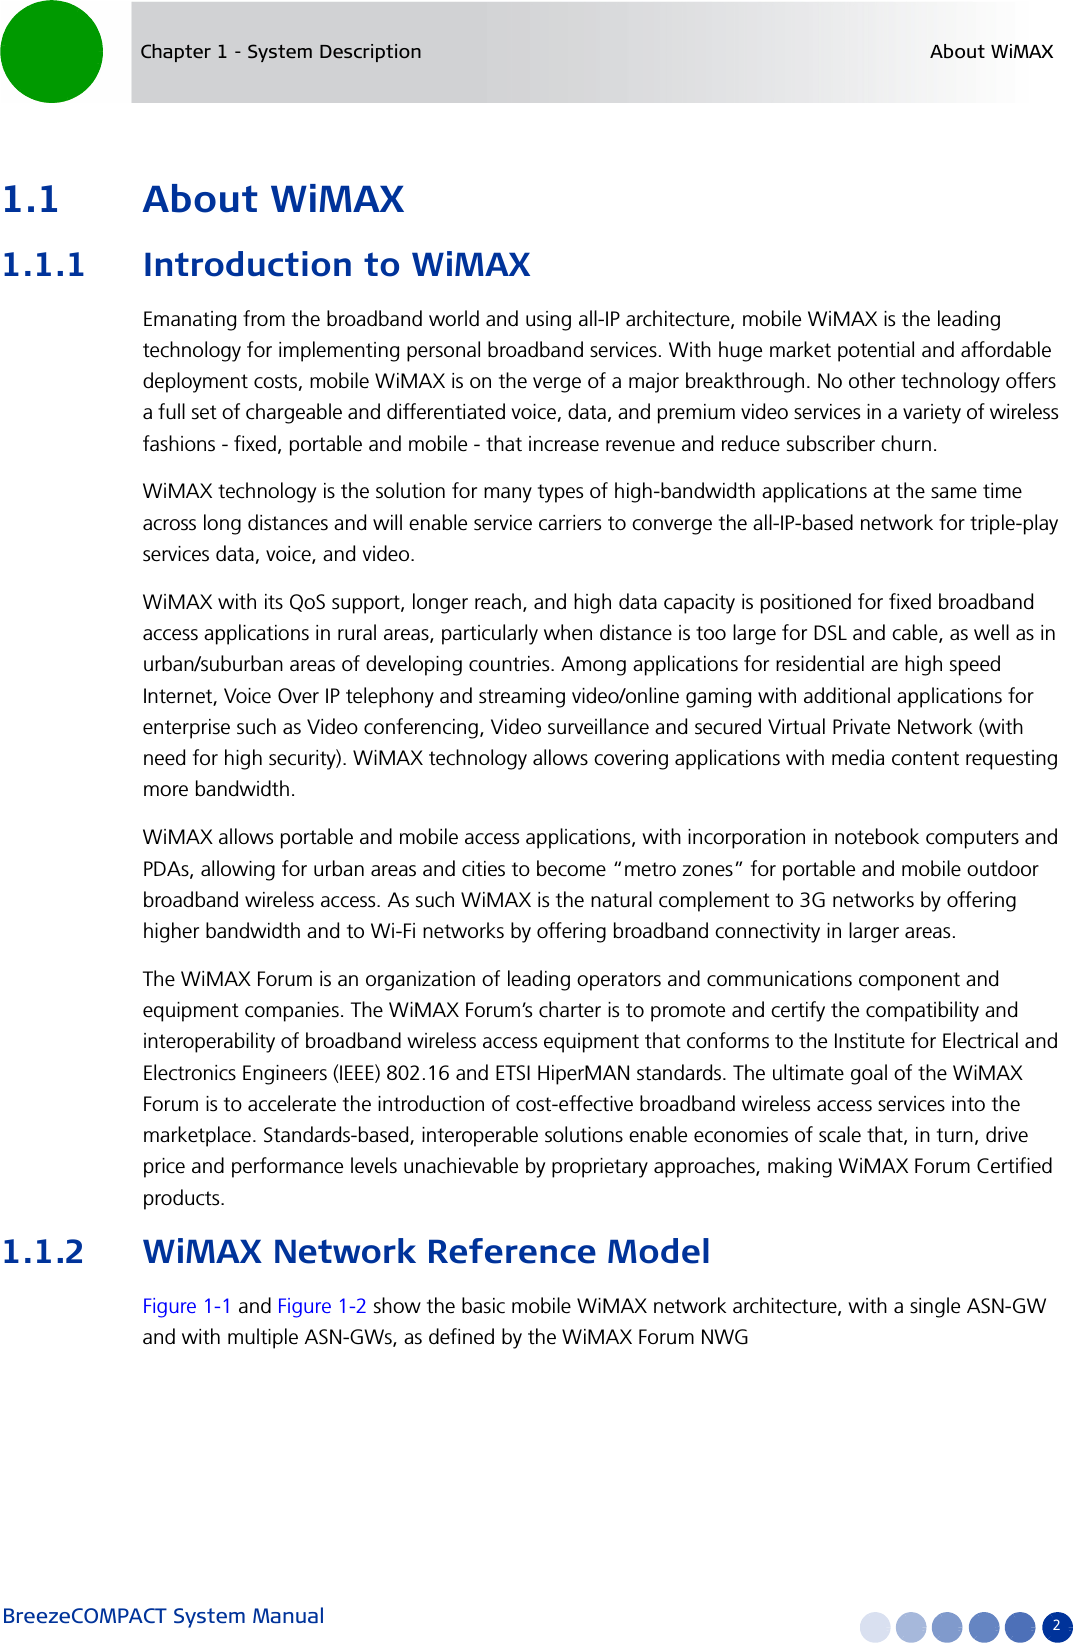 BreezeCOMPACT System Manual 2Chapter 1 - System Description About WiMAX1.1 About WiMAX1.1.1 Introduction to WiMAXEmanating from the broadband world and using all-IP architecture, mobile WiMAX is the leading technology for implementing personal broadband services. With huge market potential and affordable deployment costs, mobile WiMAX is on the verge of a major breakthrough. No other technology offers a full set of chargeable and differentiated voice, data, and premium video services in a variety of wireless fashions - fixed, portable and mobile - that increase revenue and reduce subscriber churn.WiMAX technology is the solution for many types of high-bandwidth applications at the same time across long distances and will enable service carriers to converge the all-IP-based network for triple-play services data, voice, and video.WiMAX with its QoS support, longer reach, and high data capacity is positioned for fixed broadband access applications in rural areas, particularly when distance is too large for DSL and cable, as well as in urban/suburban areas of developing countries. Among applications for residential are high speed Internet, Voice Over IP telephony and streaming video/online gaming with additional applications for enterprise such as Video conferencing, Video surveillance and secured Virtual Private Network (with need for high security). WiMAX technology allows covering applications with media content requesting more bandwidth.WiMAX allows portable and mobile access applications, with incorporation in notebook computers and PDAs, allowing for urban areas and cities to become “metro zones” for portable and mobile outdoor broadband wireless access. As such WiMAX is the natural complement to 3G networks by offering higher bandwidth and to Wi-Fi networks by offering broadband connectivity in larger areas.The WiMAX Forum is an organization of leading operators and communications component and equipment companies. The WiMAX Forum’s charter is to promote and certify the compatibility and interoperability of broadband wireless access equipment that conforms to the Institute for Electrical and Electronics Engineers (IEEE) 802.16 and ETSI HiperMAN standards. The ultimate goal of the WiMAX Forum is to accelerate the introduction of cost-effective broadband wireless access services into the marketplace. Standards-based, interoperable solutions enable economies of scale that, in turn, drive price and performance levels unachievable by proprietary approaches, making WiMAX Forum Certified products.1.1.2 WiMAX Network Reference ModelFigure 1-1 and Figure 1-2 show the basic mobile WiMAX network architecture, with a single ASN-GW and with multiple ASN-GWs, as defined by the WiMAX Forum NWG